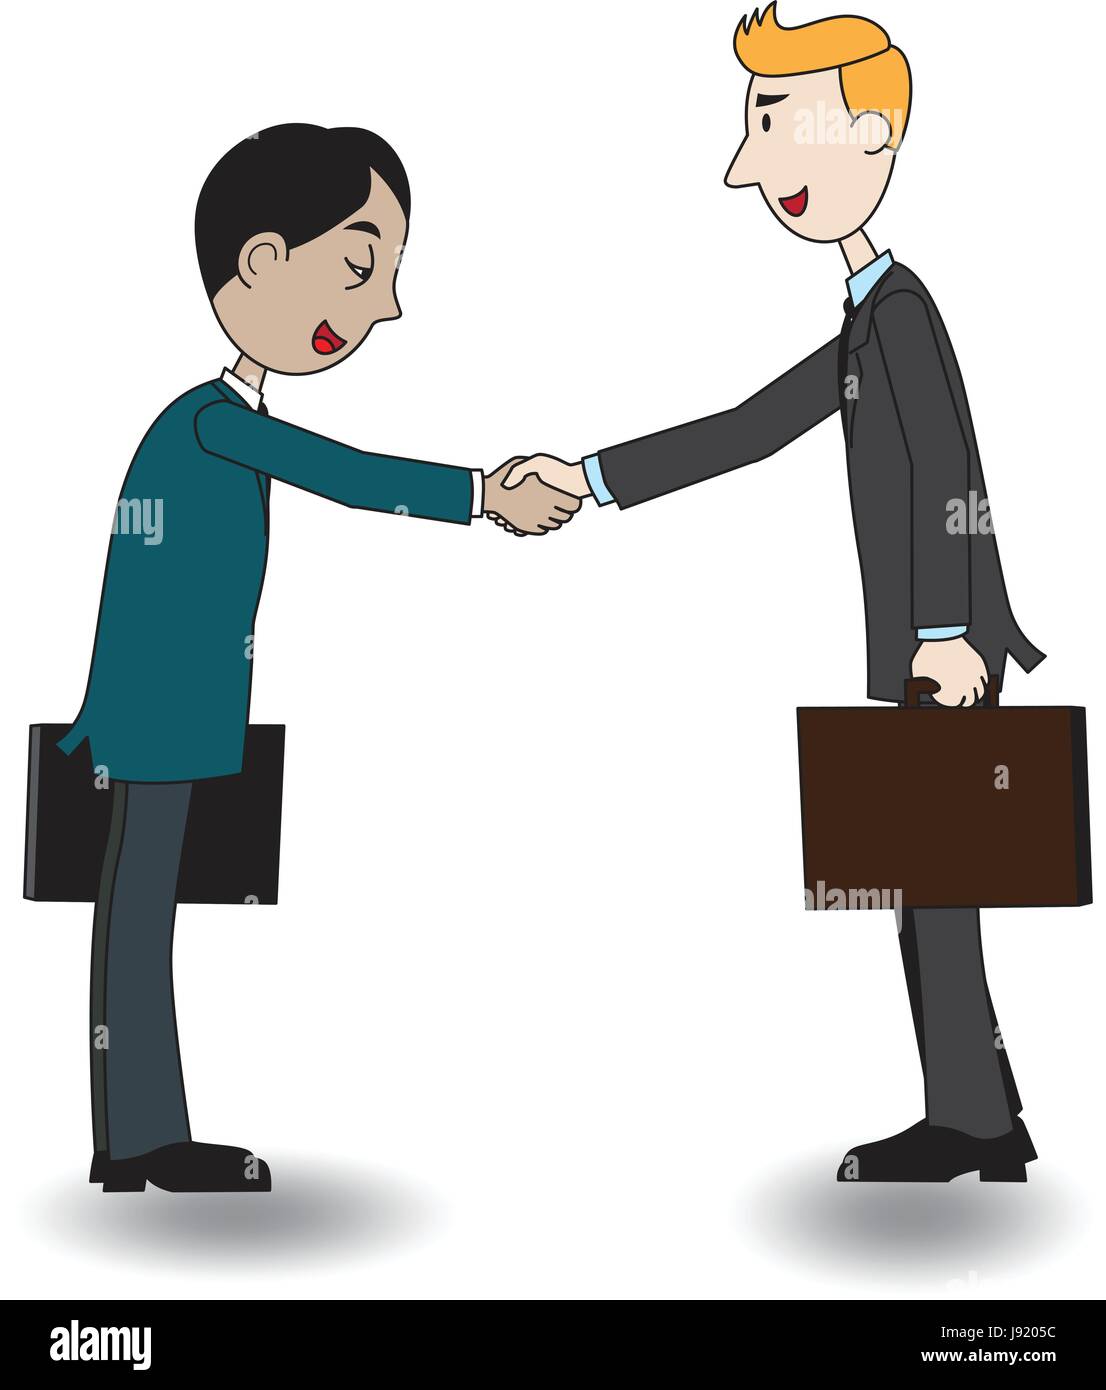 Cartoon illustration of a partnership and cooperation in business. Two happy businessmen shake hands.  one caucasoid and one asian. Stock Vector